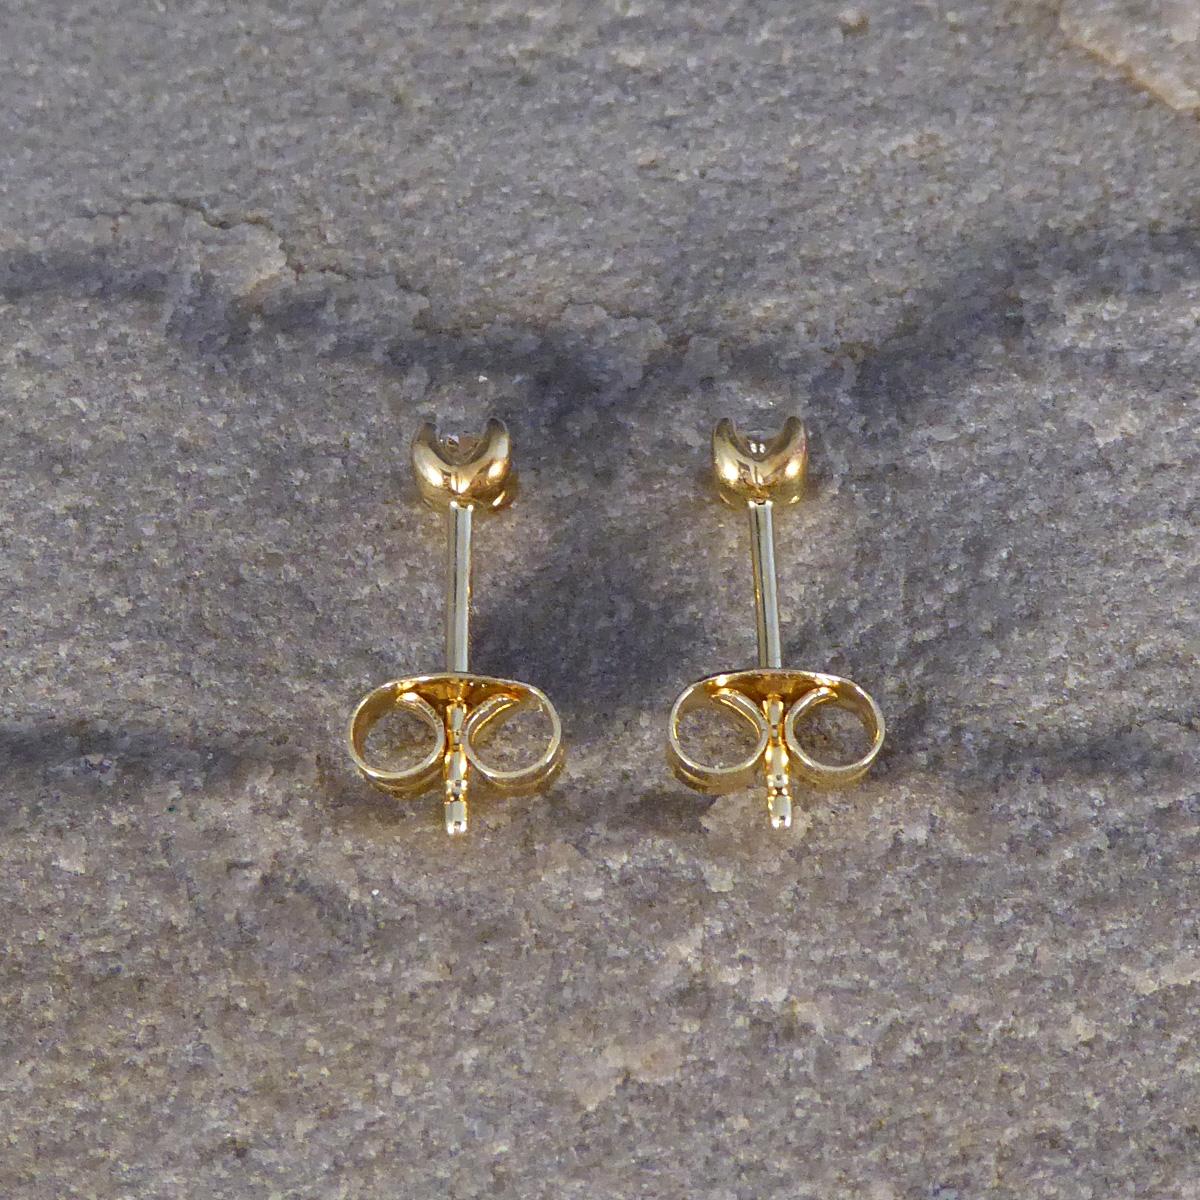 0.15ct Diamond Stud Earrings in 18ct Yellow Gold In New Condition For Sale In Yorkshire, West Yorkshire